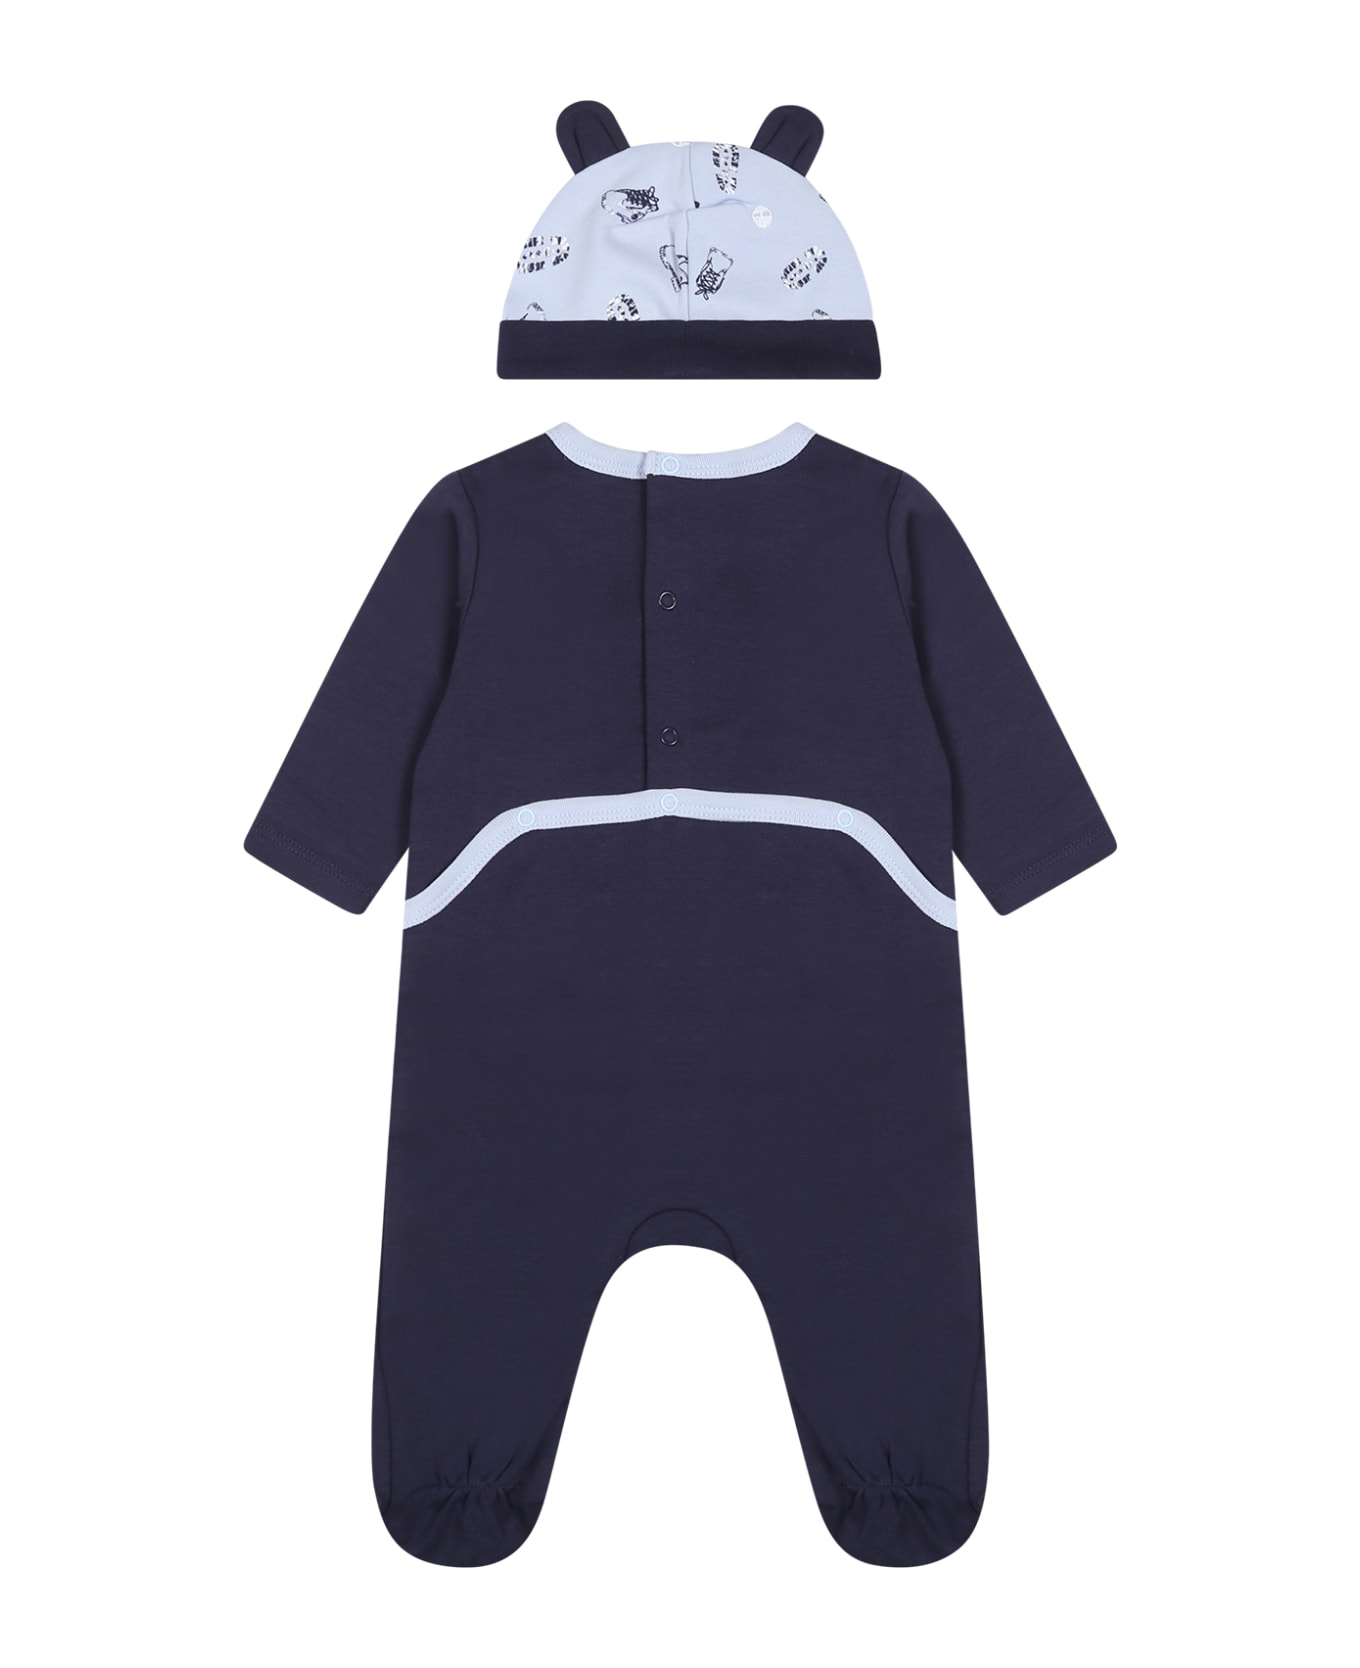 Timberland Blue Set For Baby Boy With Logo - Light Blue